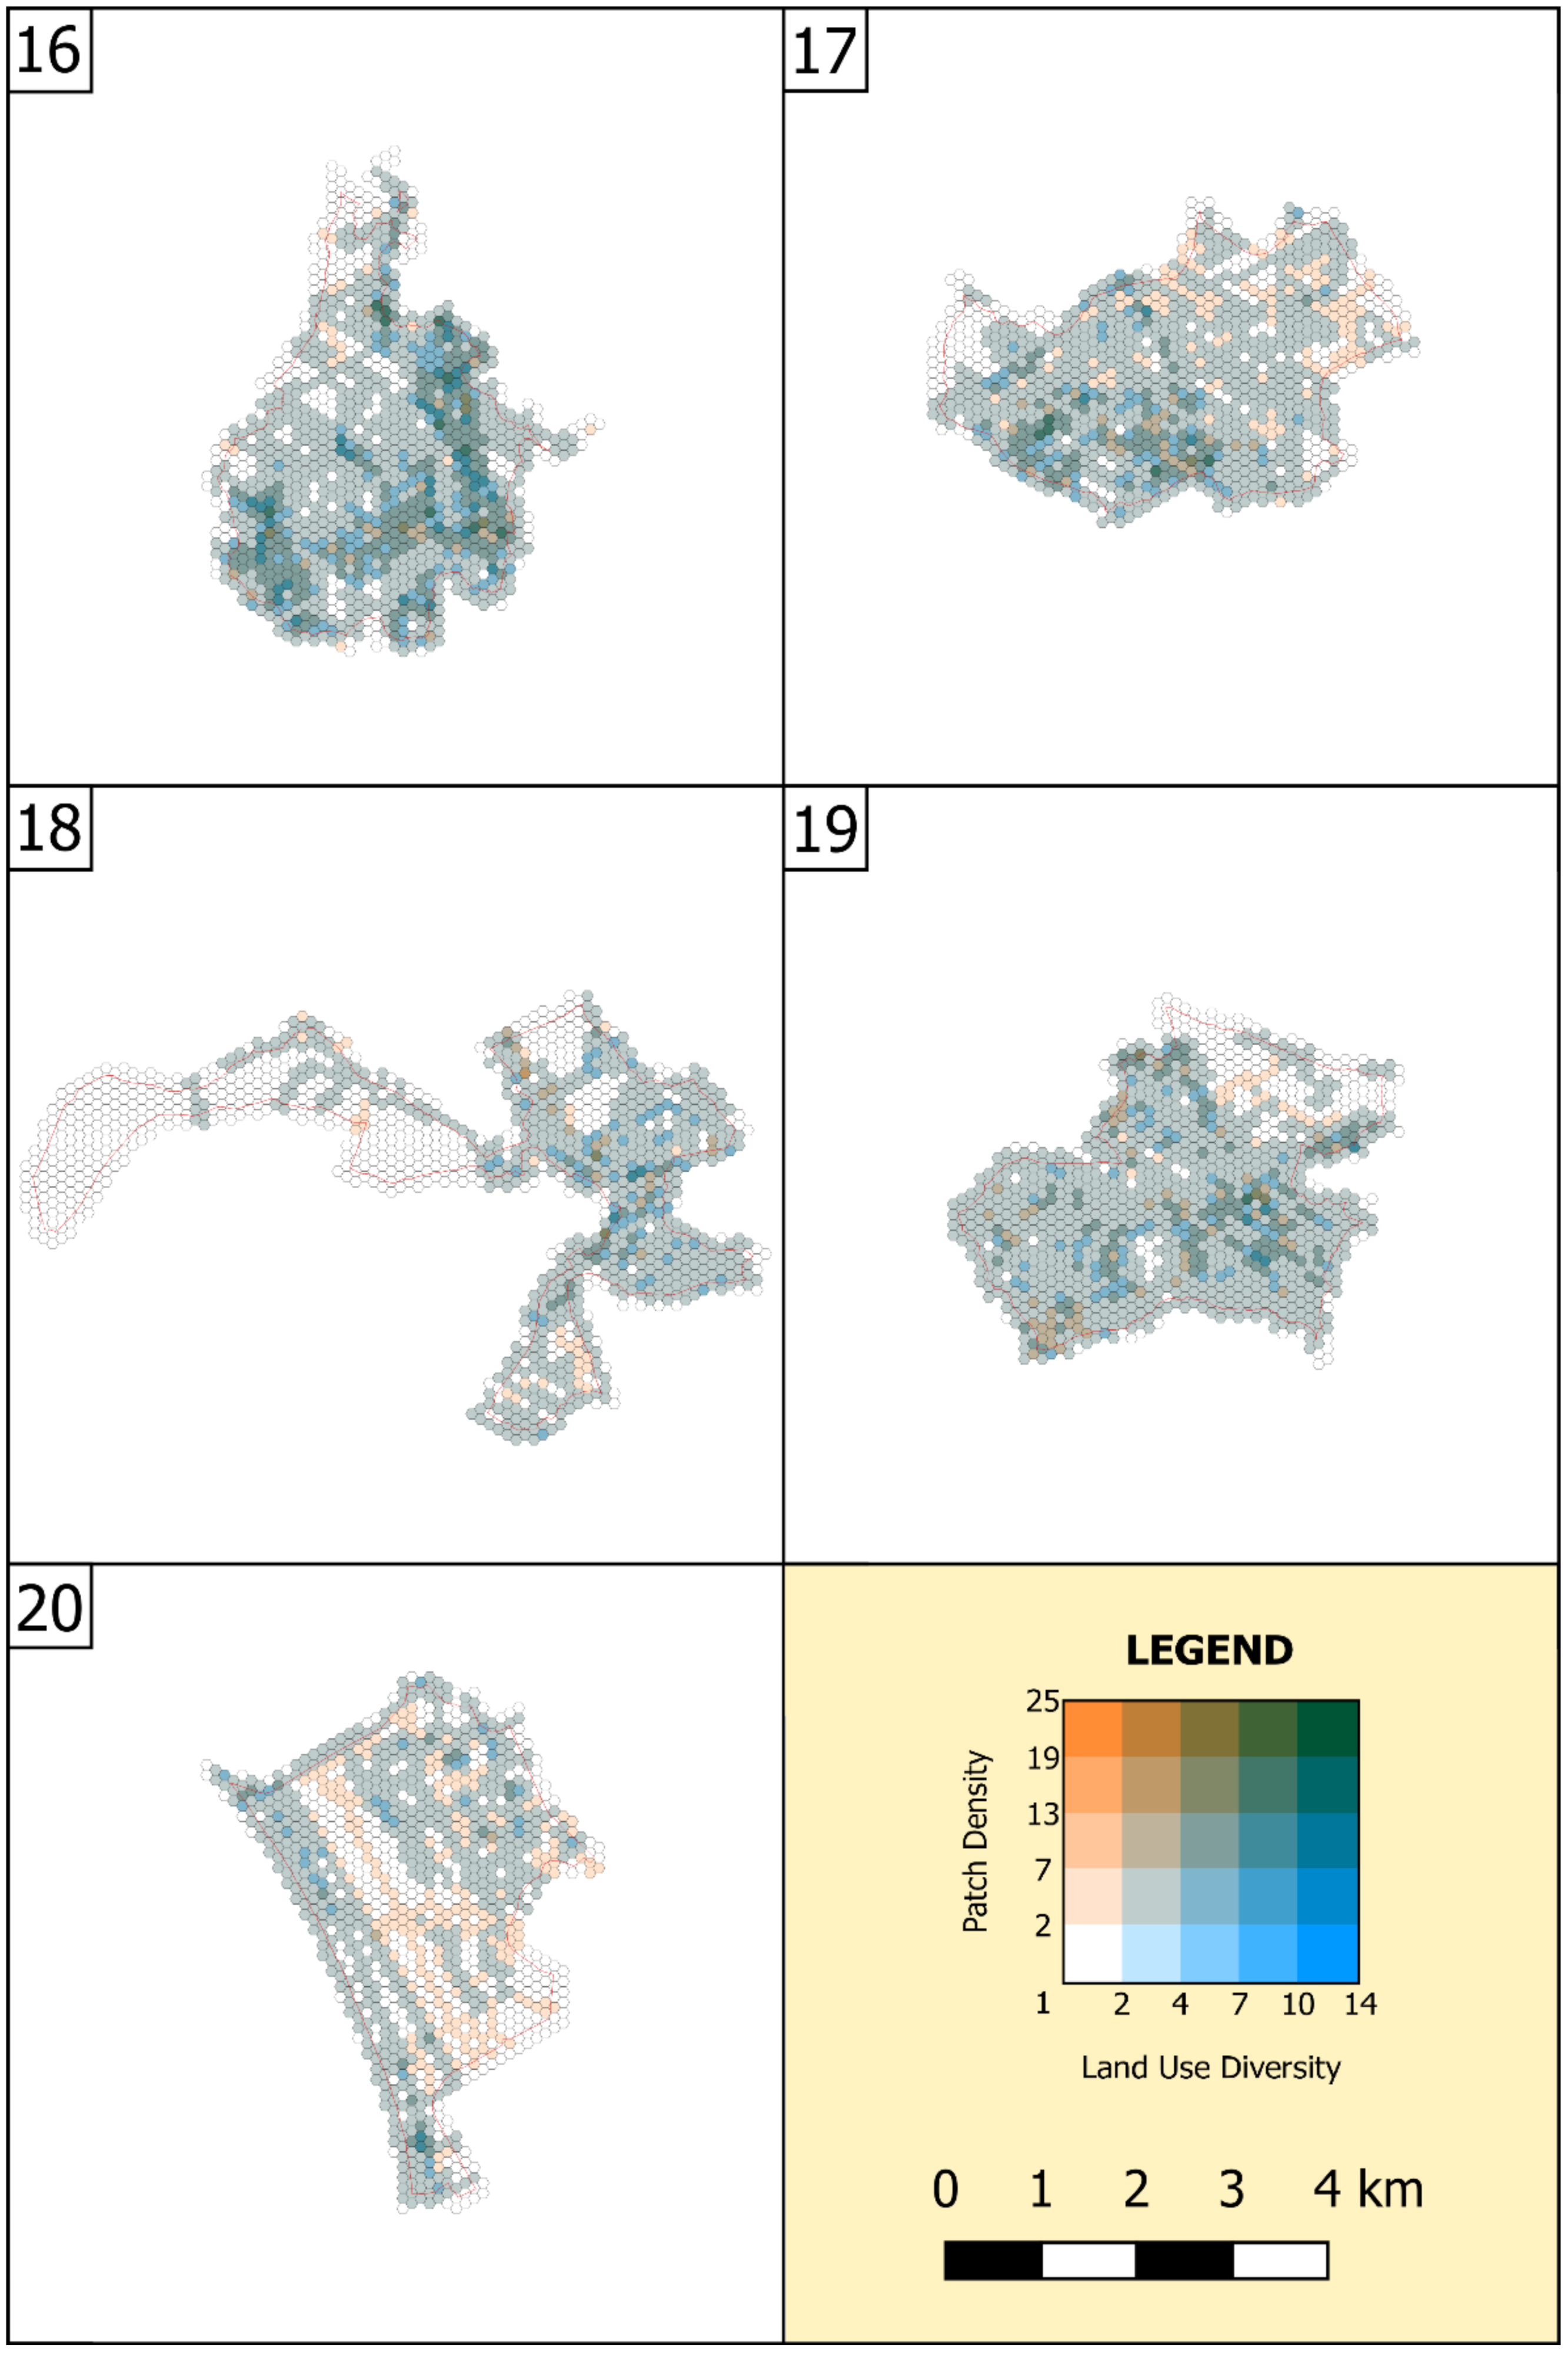 Sustainability | Free Full-Text | Assessment of Tuscany Landscape Structure  According to the Regional Landscape Plan Partition | HTML